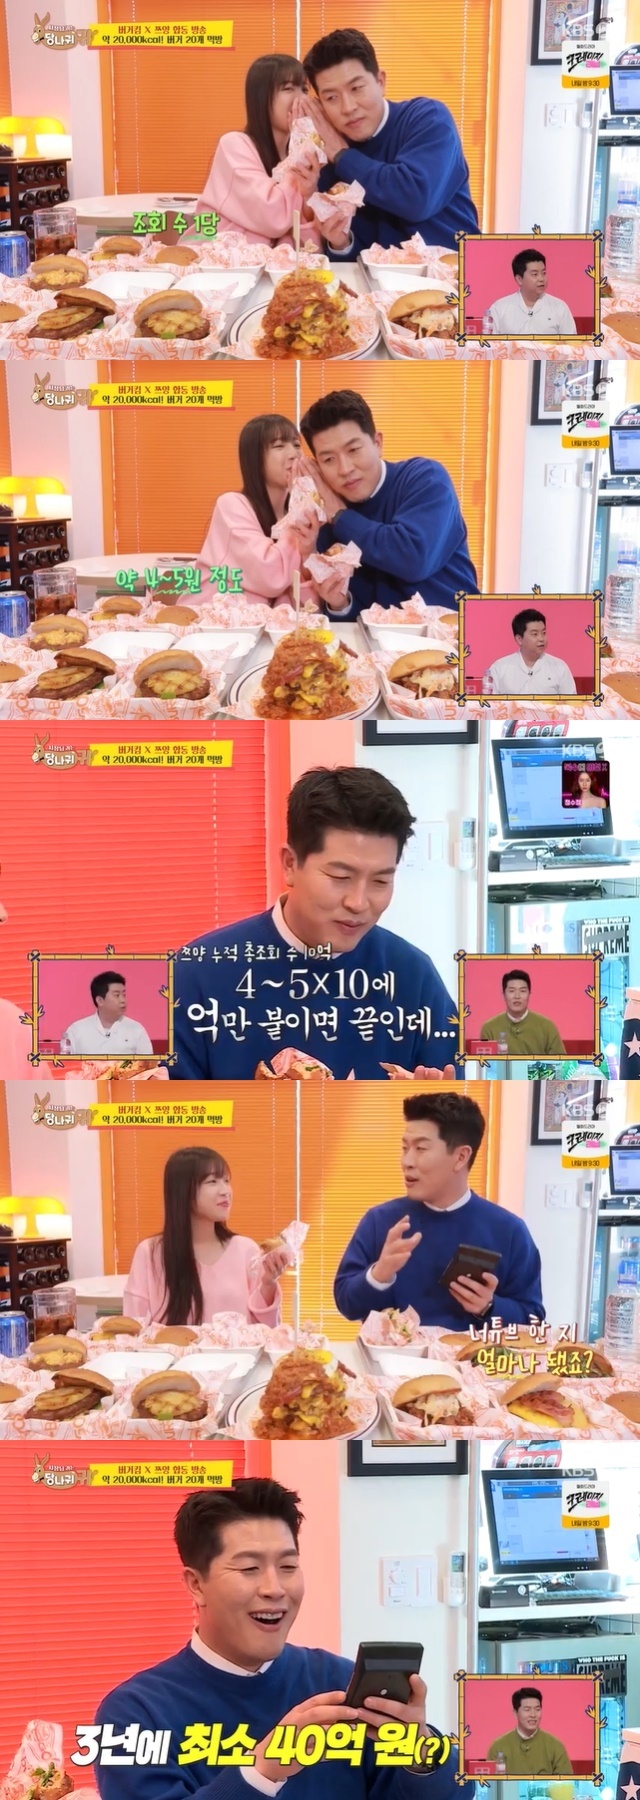 Kim Byung-hyun has set in for tzuyangs imaginative transcendental earnings.In the 147th KBS 2TV entertainment Boss in the Mirror (hereinafter referred to as The Assassin Ear) broadcast on March 13, 5.74 million subscribers and about 1 billion views of food creator tzuyang visited Kim Byung-hyuns Burger House Cheongdam, which is about to be officially opened.On this day, tzuyang showed off his food in search of Kim Byung-hyuns burger house for a promotional event.Among them, there was also a Tzuburger developed for the meat-eating tzuyang, which dislikes vegetables.It was a burger with five chicken patties, five beef patties, and 10,000 calories with bacon and egg fri on top.During the meal, Kim Byung-hyun asked tzuyang, How much revenue do you have if you have a billion views?Tzuyang said in his whisper, About 4 One to 5 One per view, and Kim Byung-hyun, with the help of a calculator, calculated a figure of nearly 40-5 billion, and called it sister, sister and laughed.